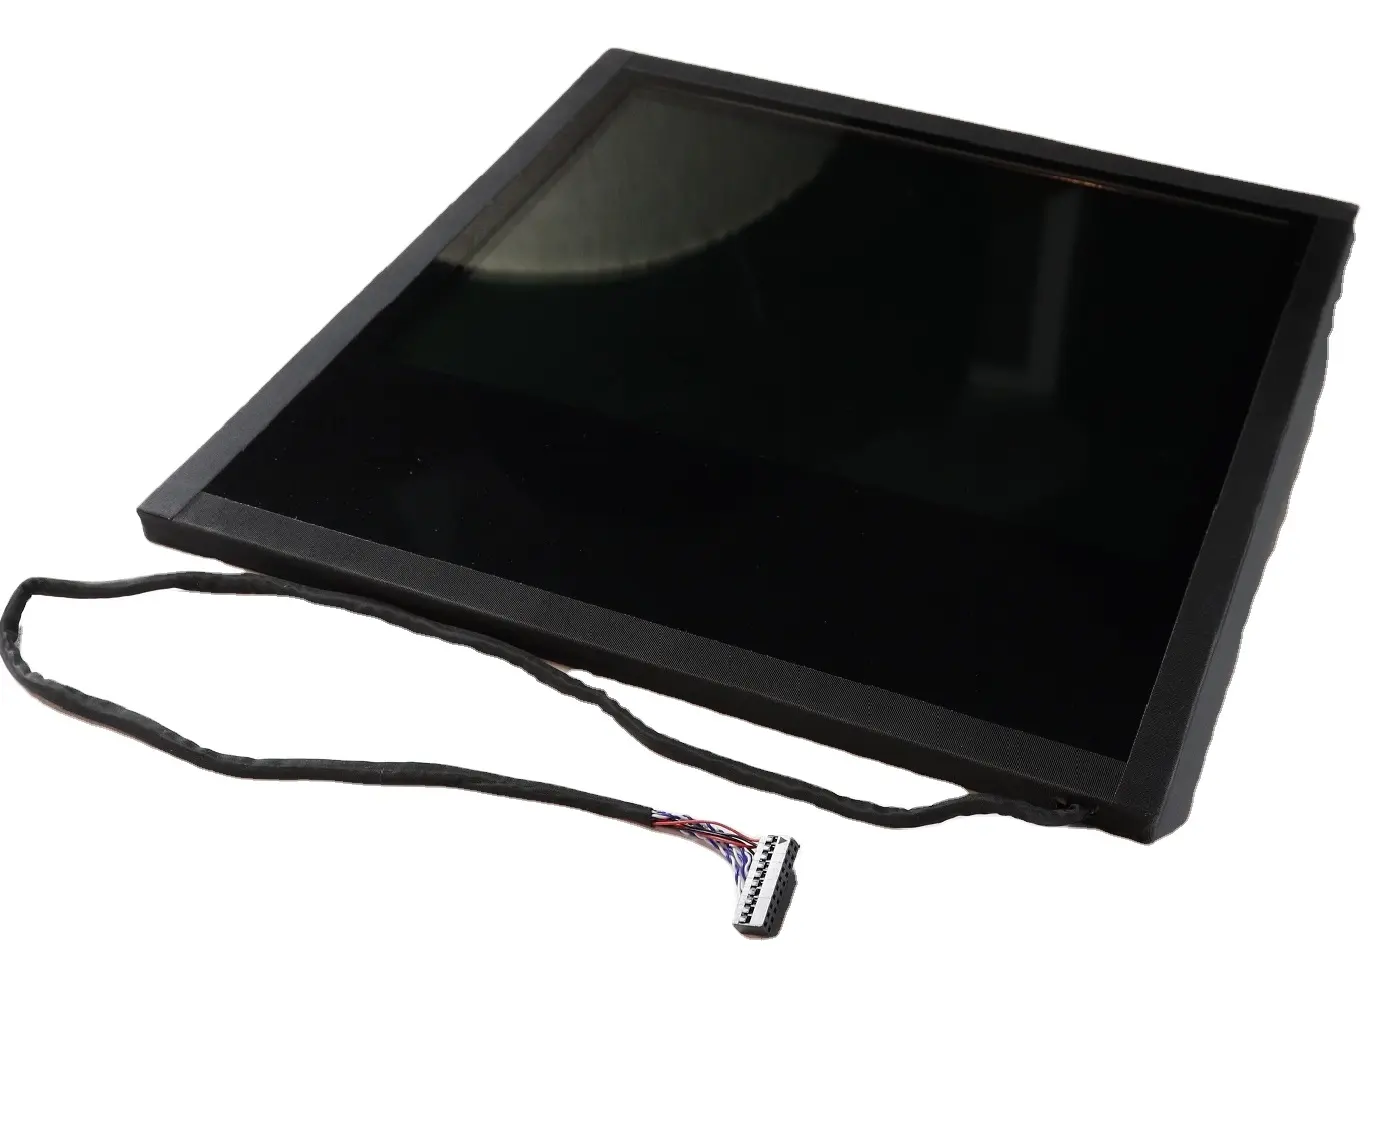 10 15 17 19 22 26 32 43 55 65 75 86 Inch Reclame Screen Interactieve Lcd-scherm Transparant lcd Display Panels